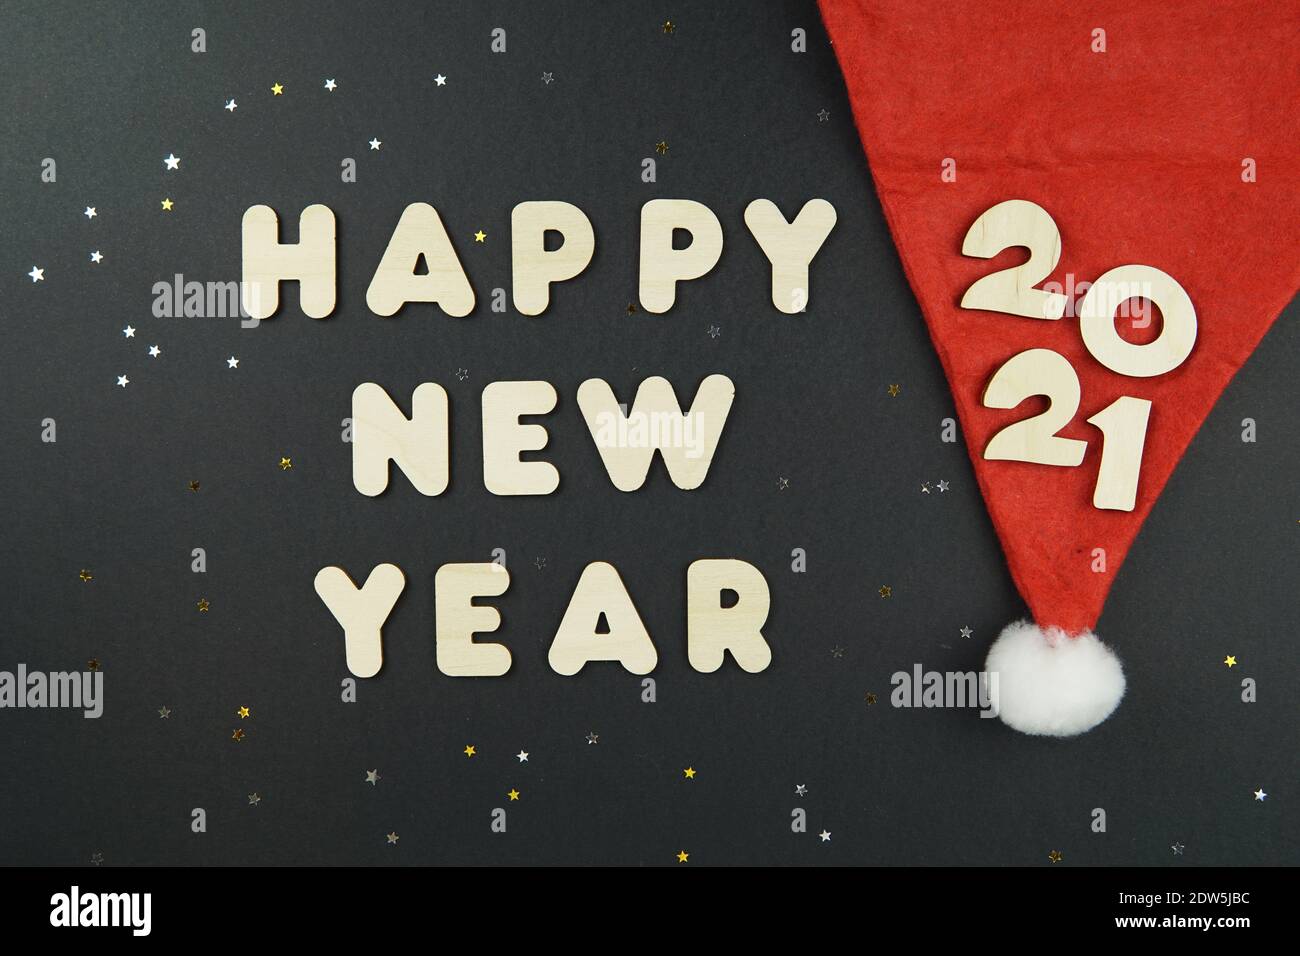 Wooden numbers 2021 on a red Santa hat and words HAPPY NEW YEAR on a black background with yellow and gray glitter stars. Stock Photo